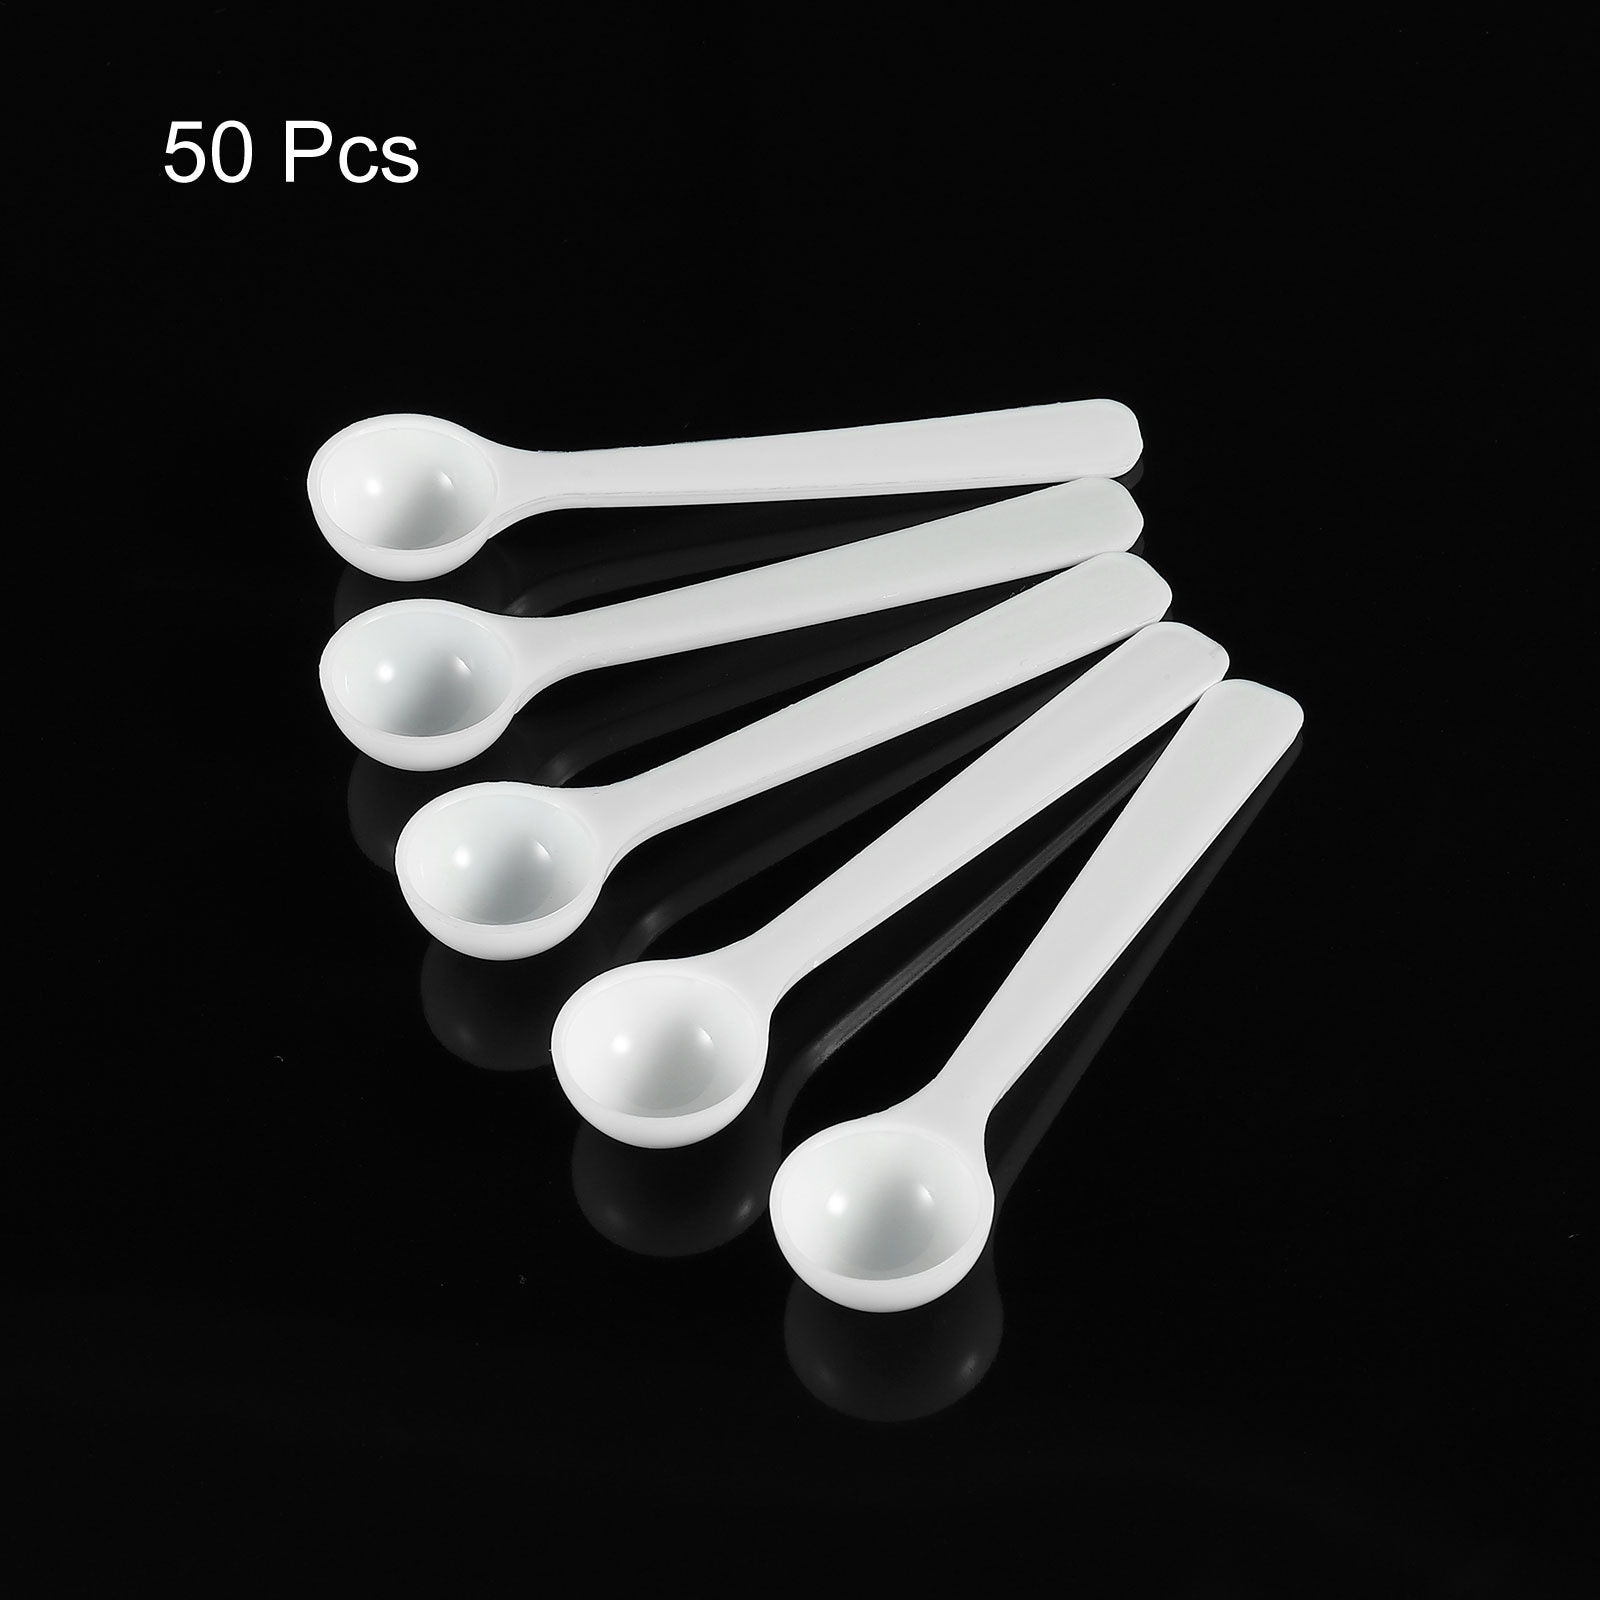 https://ak1.ostkcdn.com/images/products/is/images/direct/f7a759a337b2c2750ffc0e131e0fb67f9eee9970/Micro-Spoons-1-Gram-Measuring-Scoop-Plastic-Round-Bottom-Mini-Spoon-50Pcs.jpg